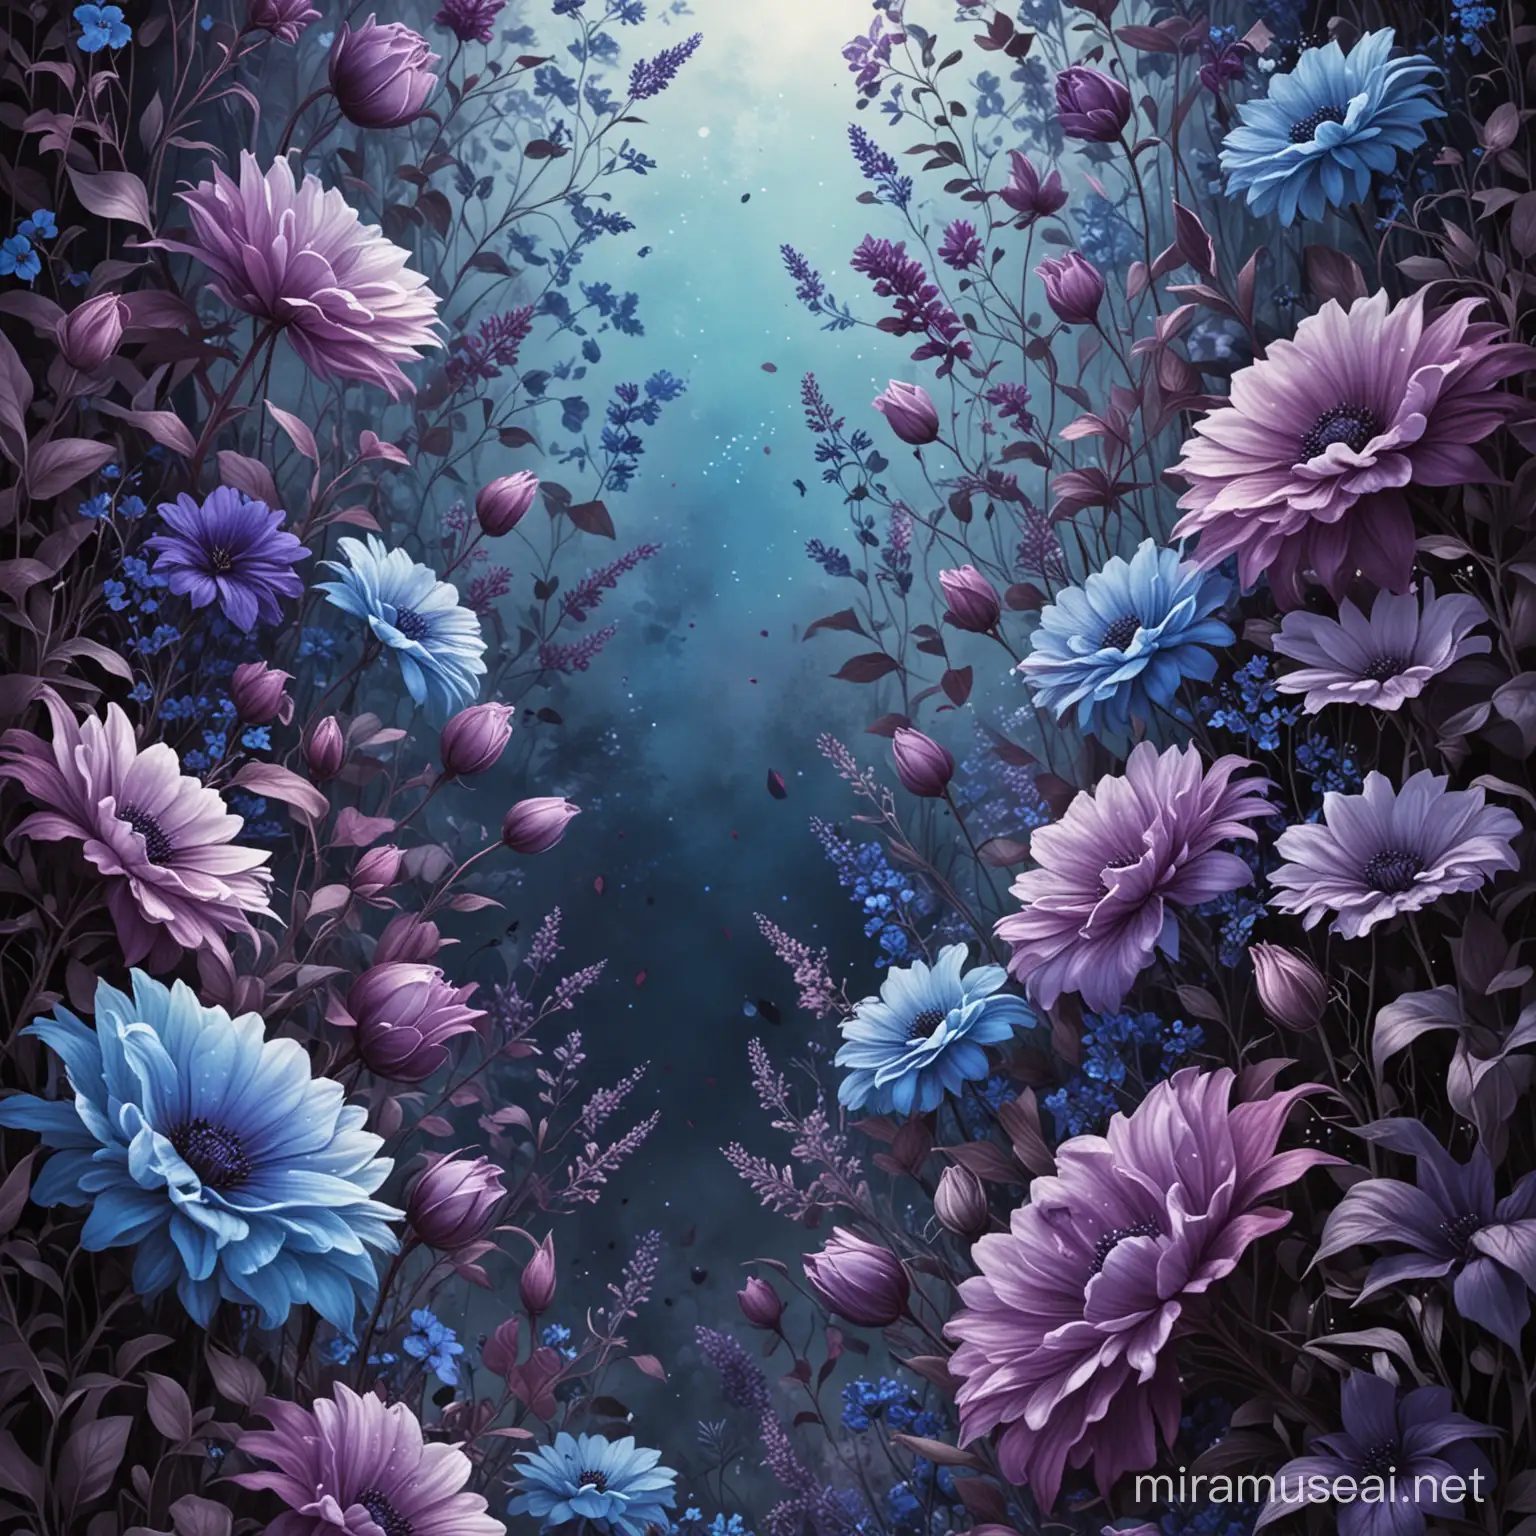 Romantic Novel Cover with Enchanting Dark Purple and Blue Flowers